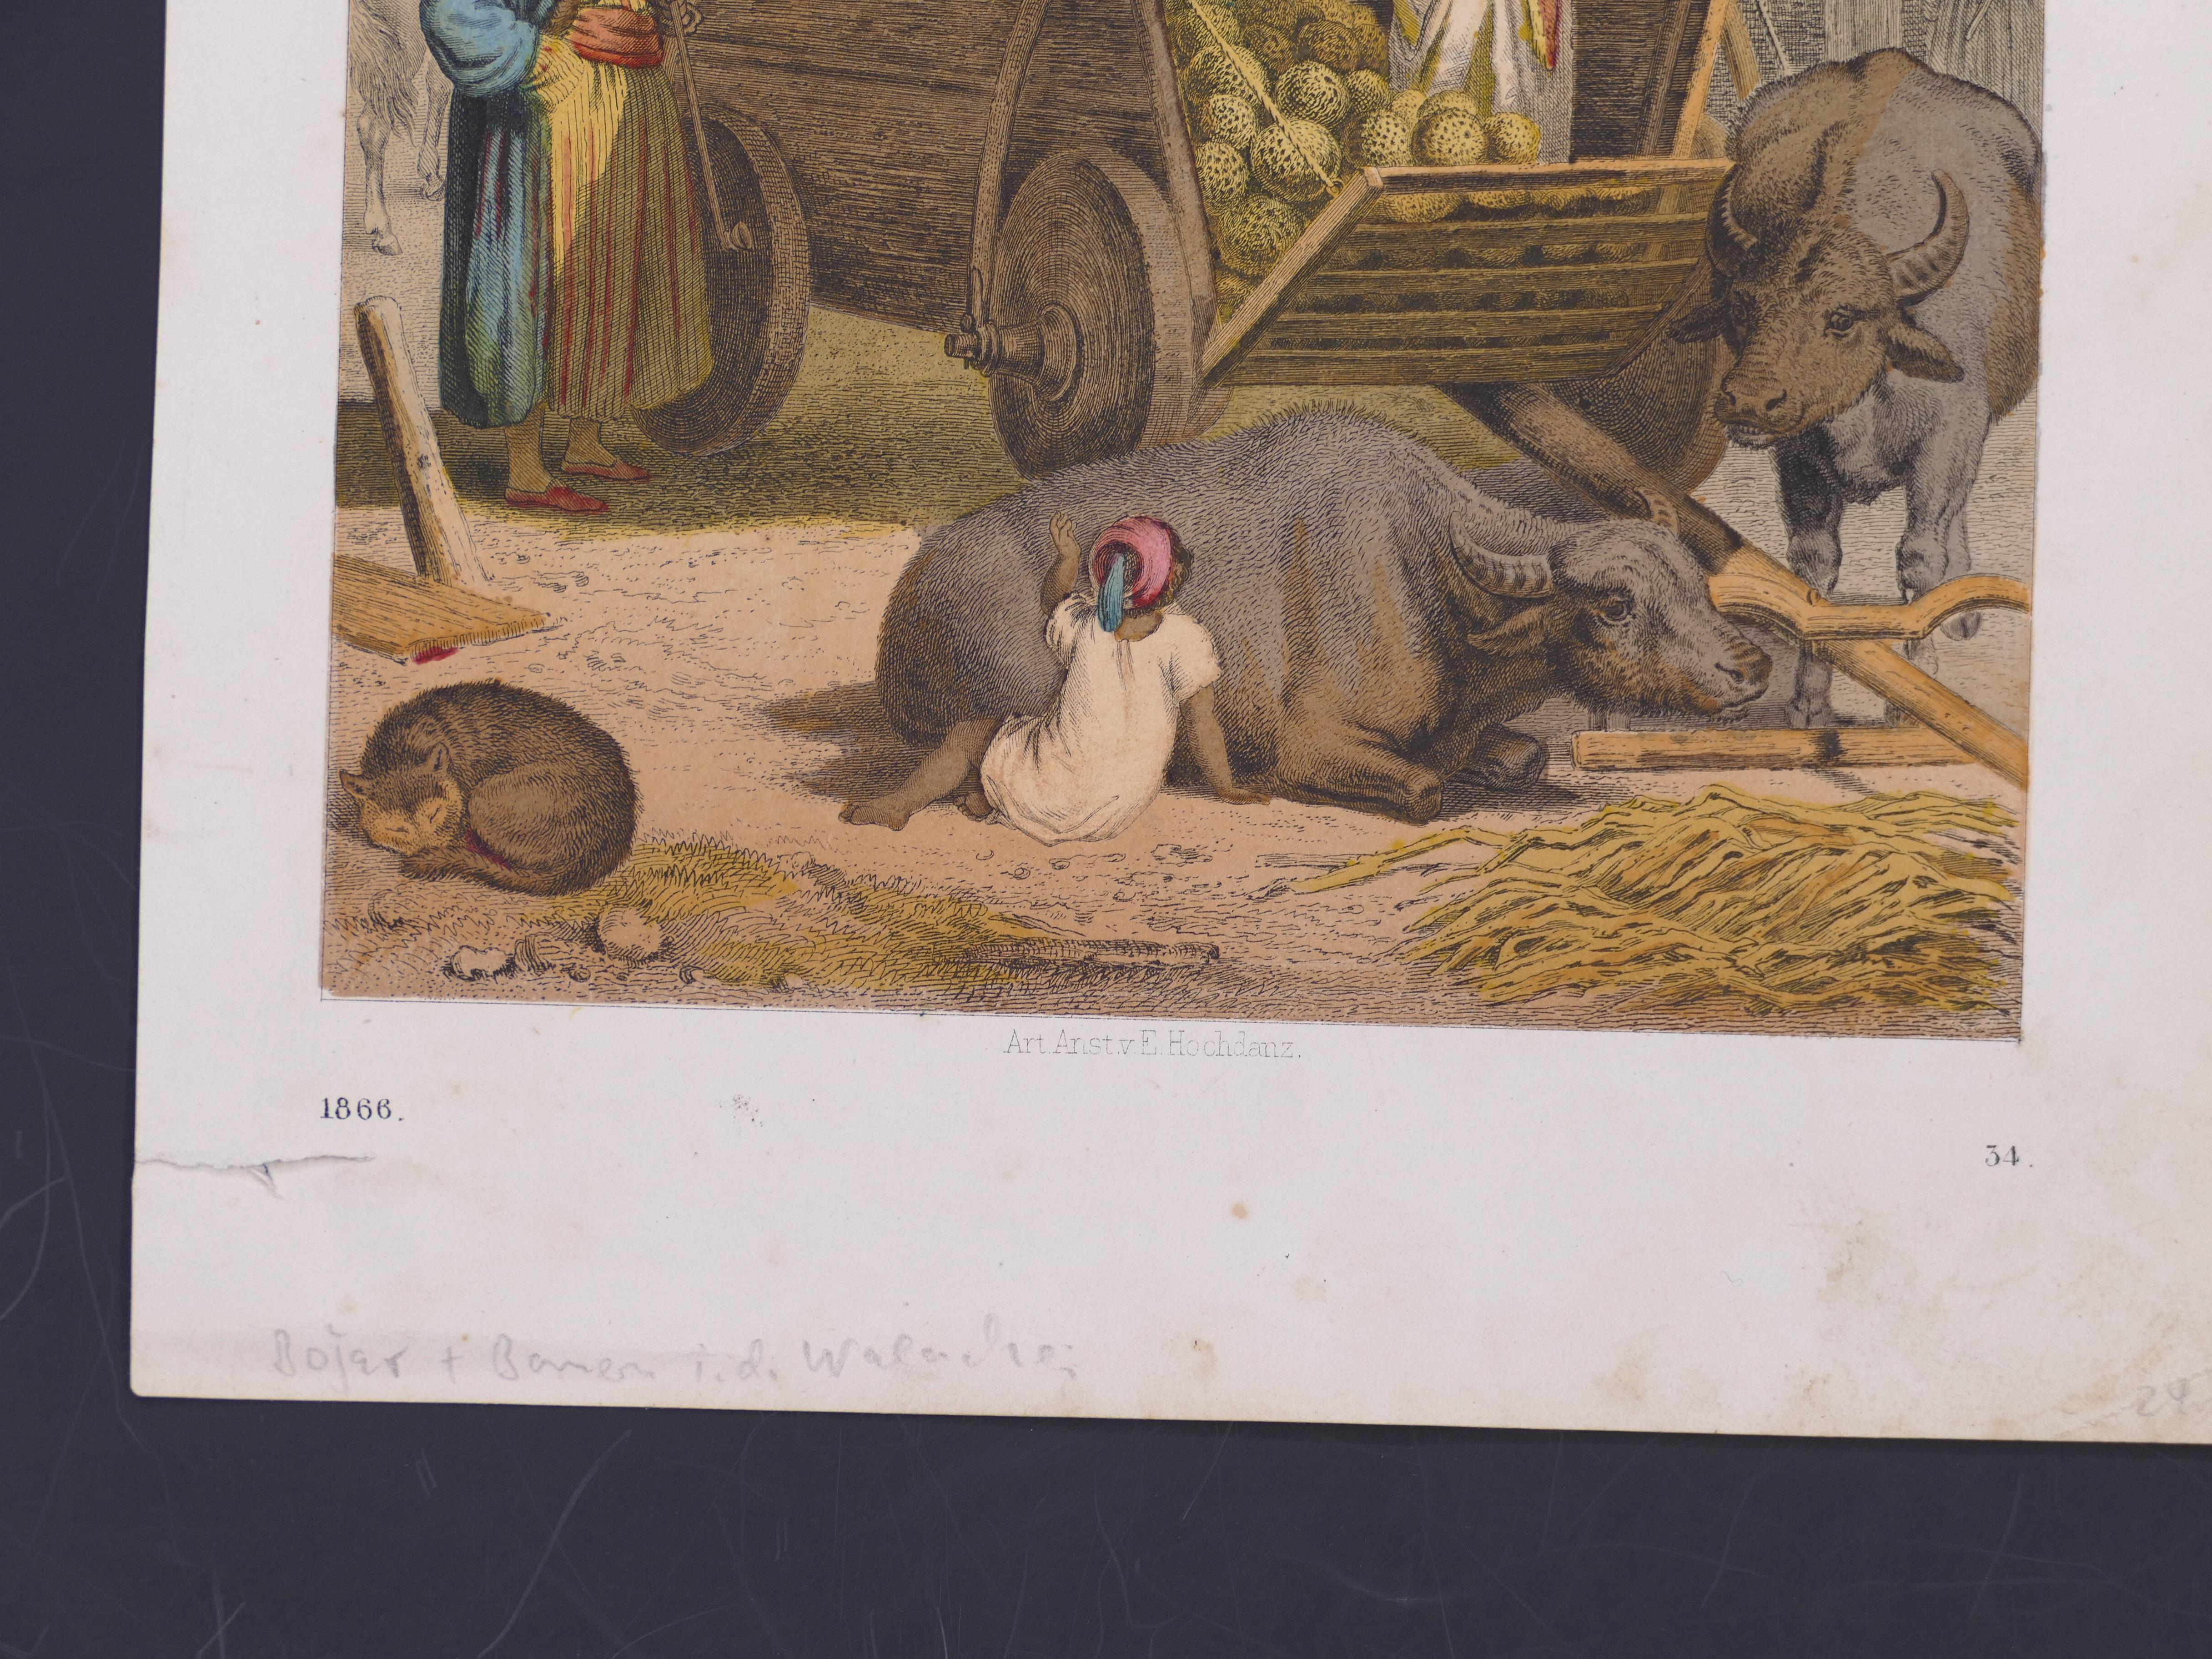 Image dimension: 20.5 x 15.3 cm.

Signed under the plate: Art Anst.v. E. Hochdanz.

Dated 1866, p.34. Good conditions, except usual signs of aging and a browning of the paper.

This original artwork is a beautiful folkloristic scene of a Moorish